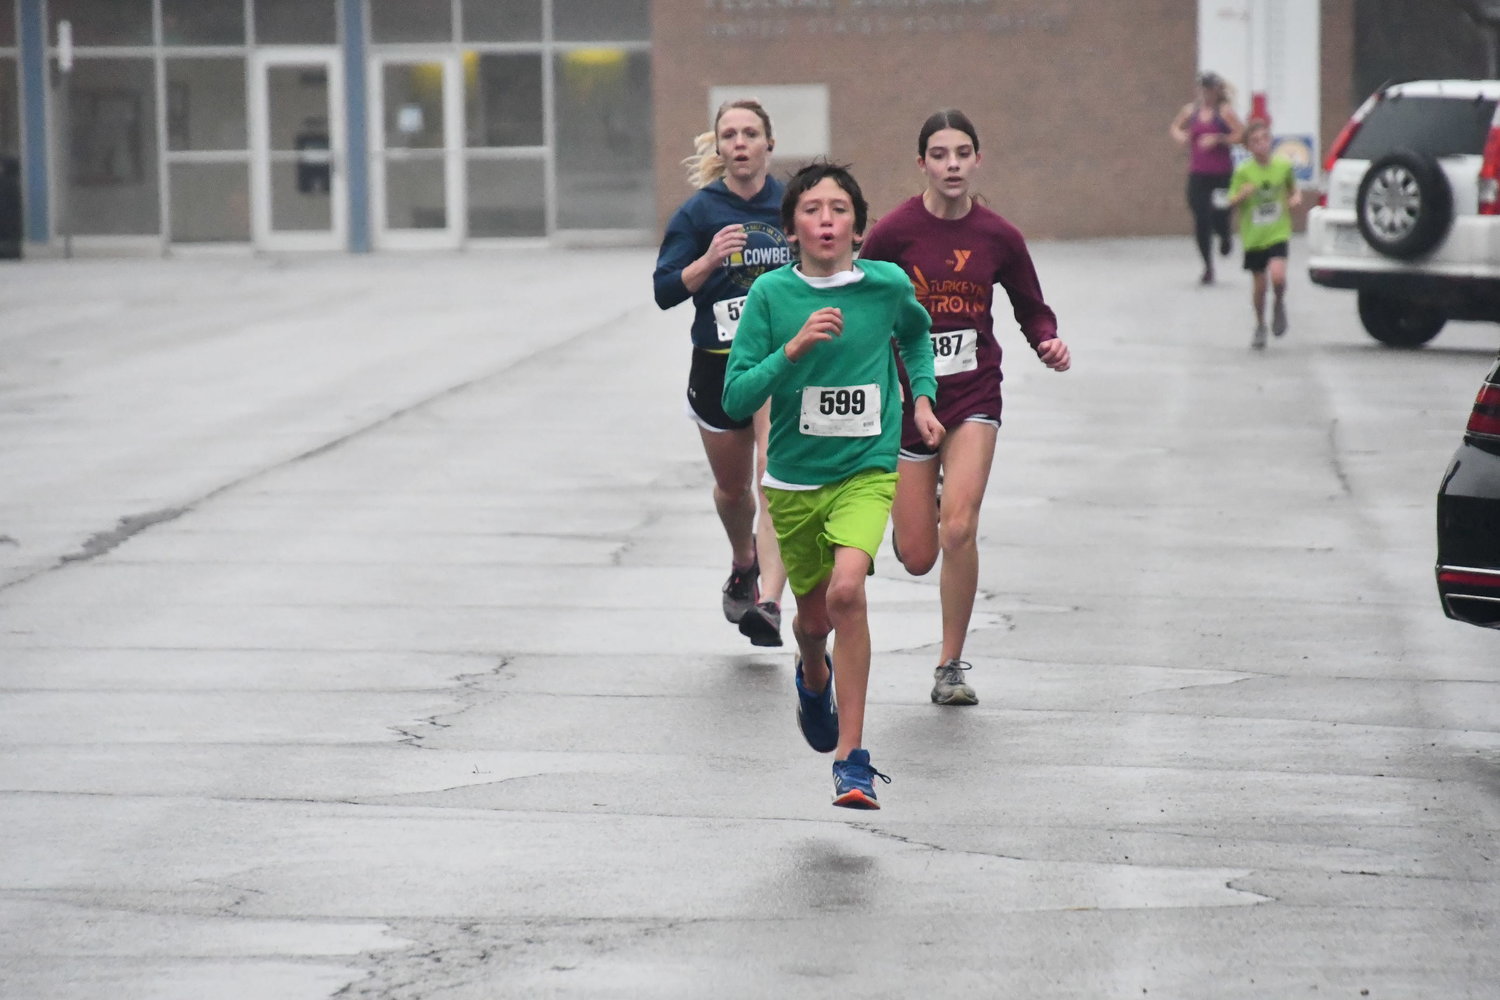 Talented Moberly Middle School runner Liam Kloski (599) was one of the top-10 finishers in the Turkey Trot.